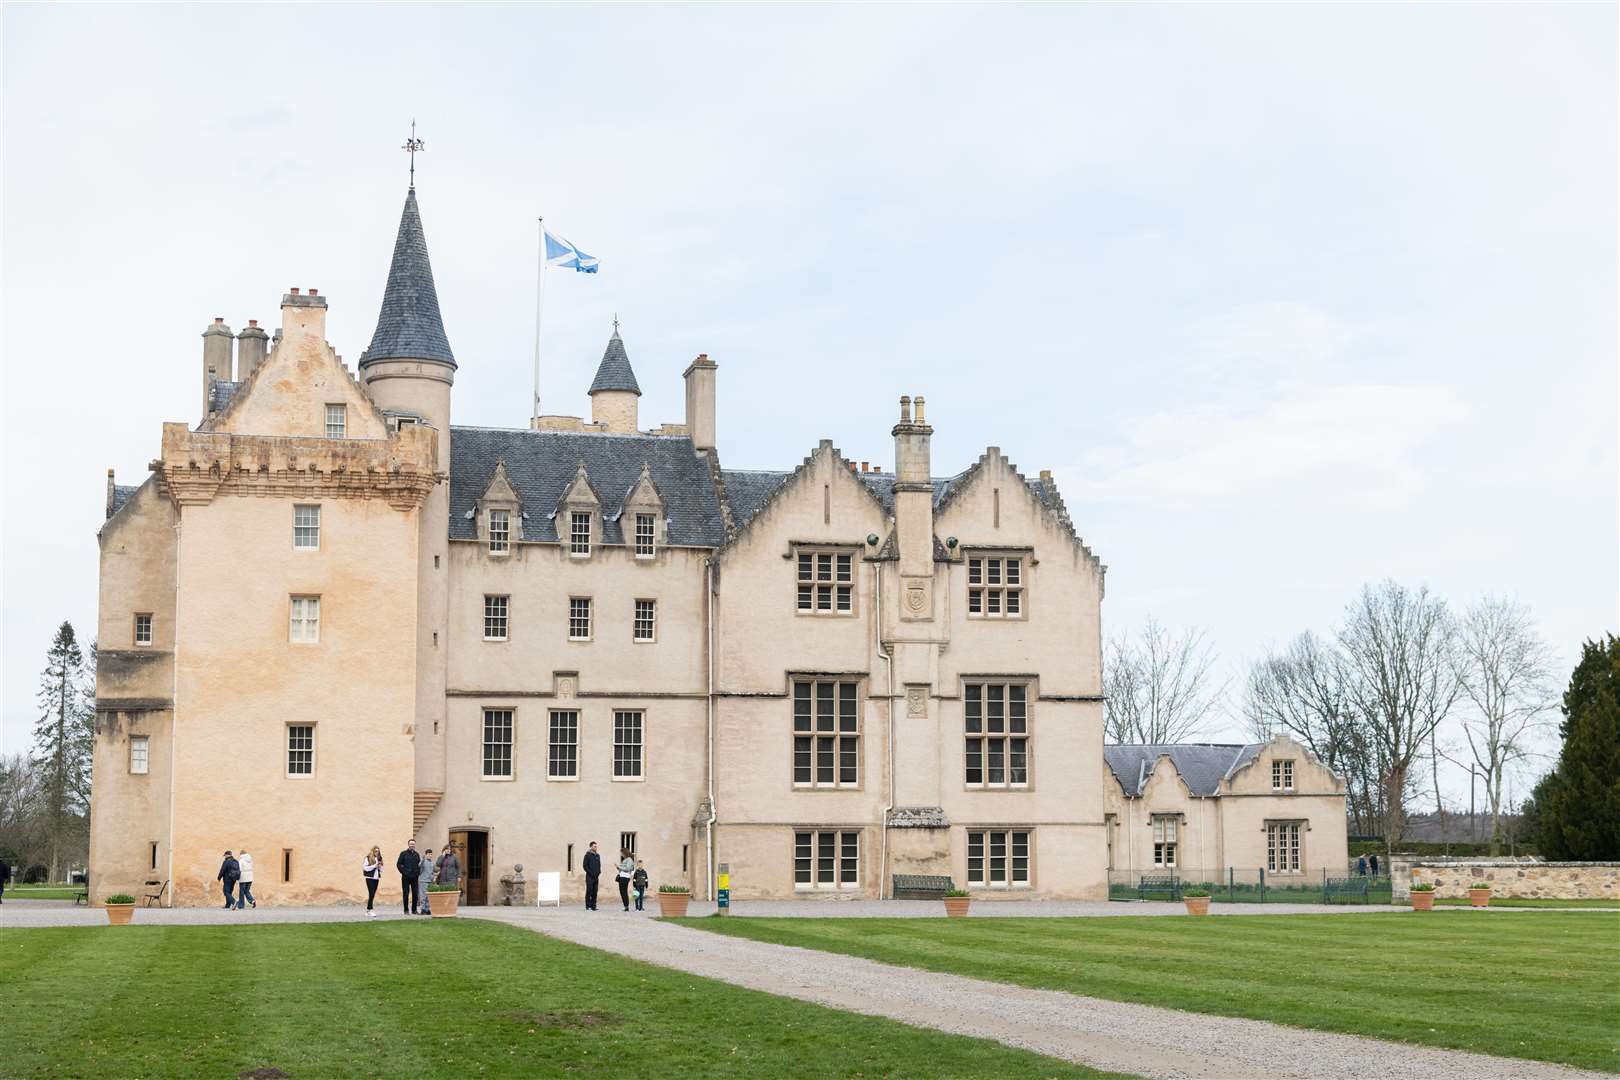 There is lots going on at Brodie Castle this summer.